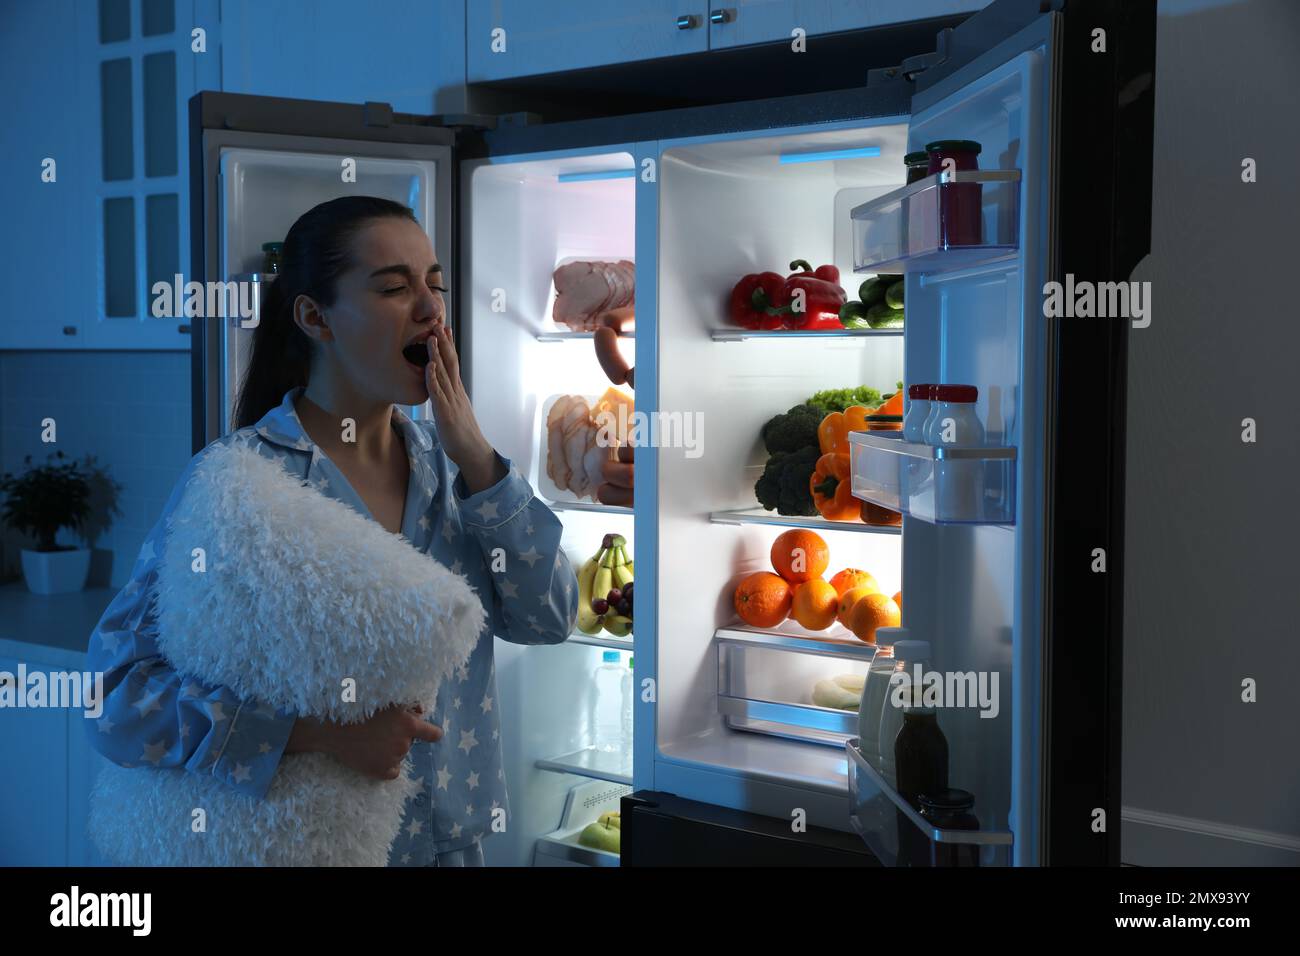 https://c8.alamy.com/comp/2MX93YY/young-woman-with-pillow-near-open-refrigerator-at-night-2MX93YY.jpg